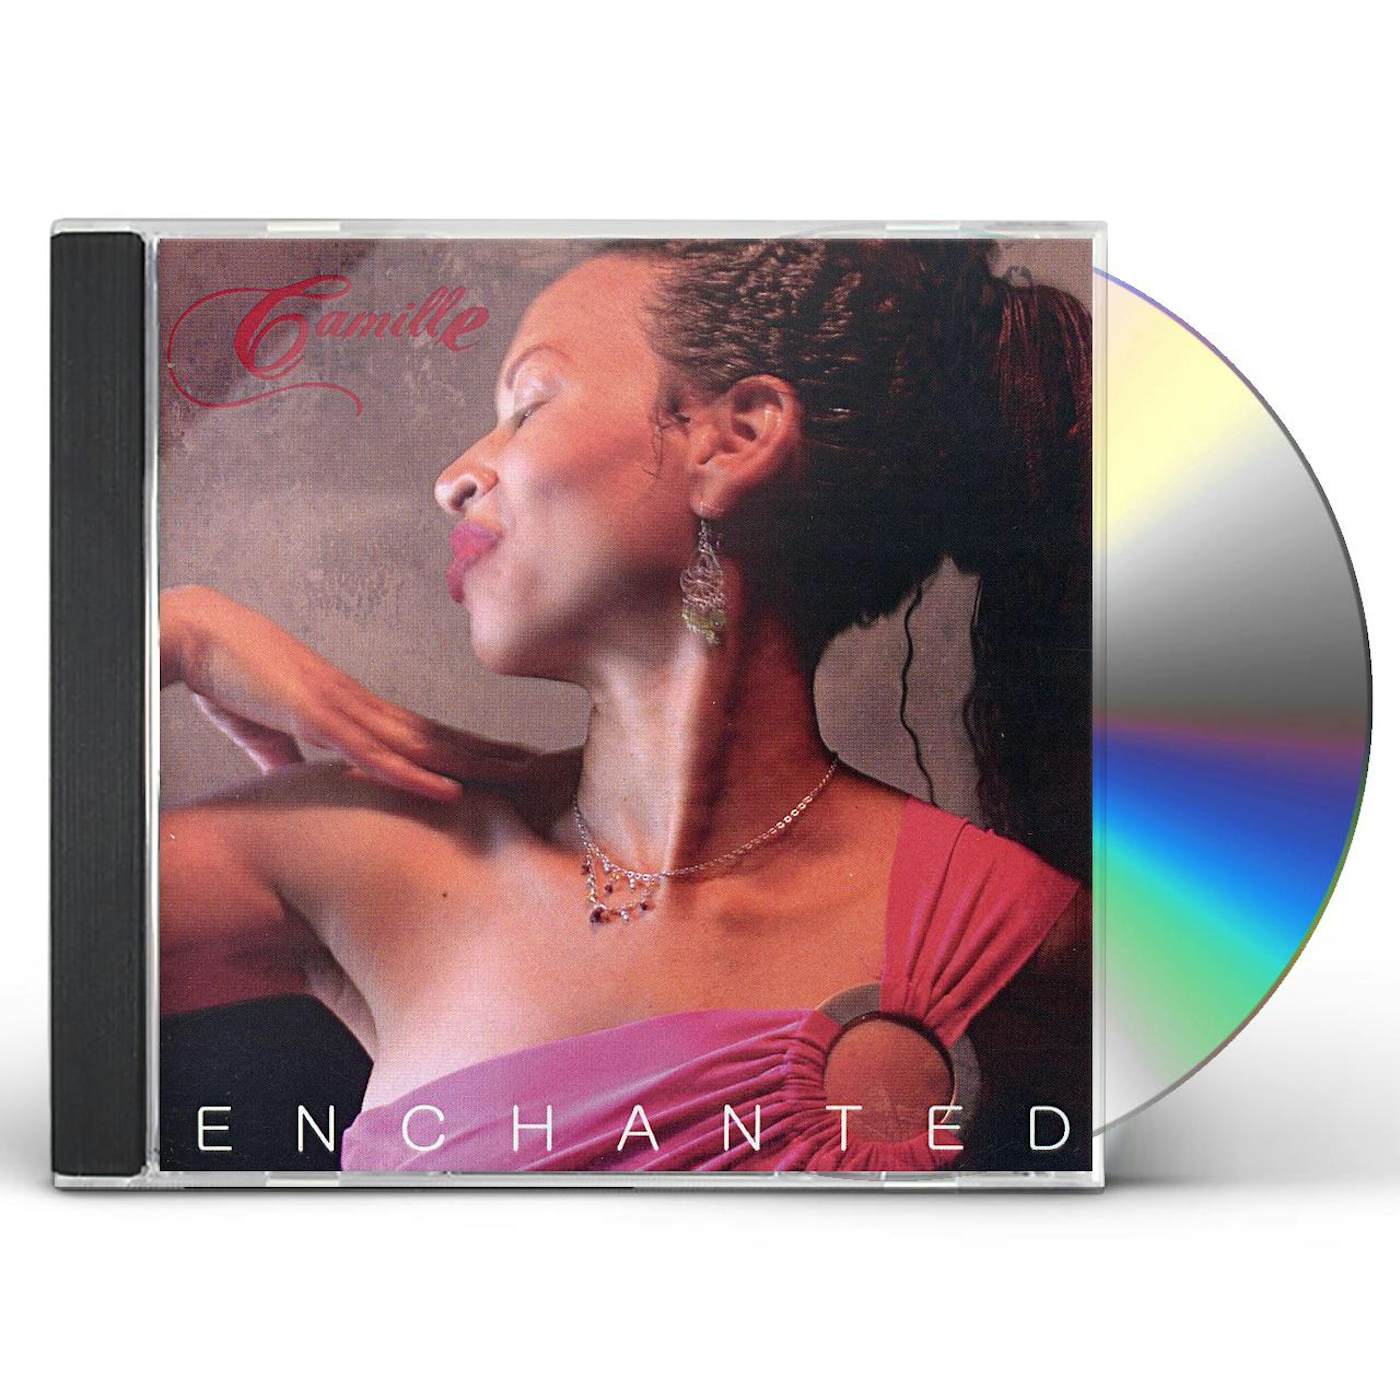 Camille ENCHANTED CD